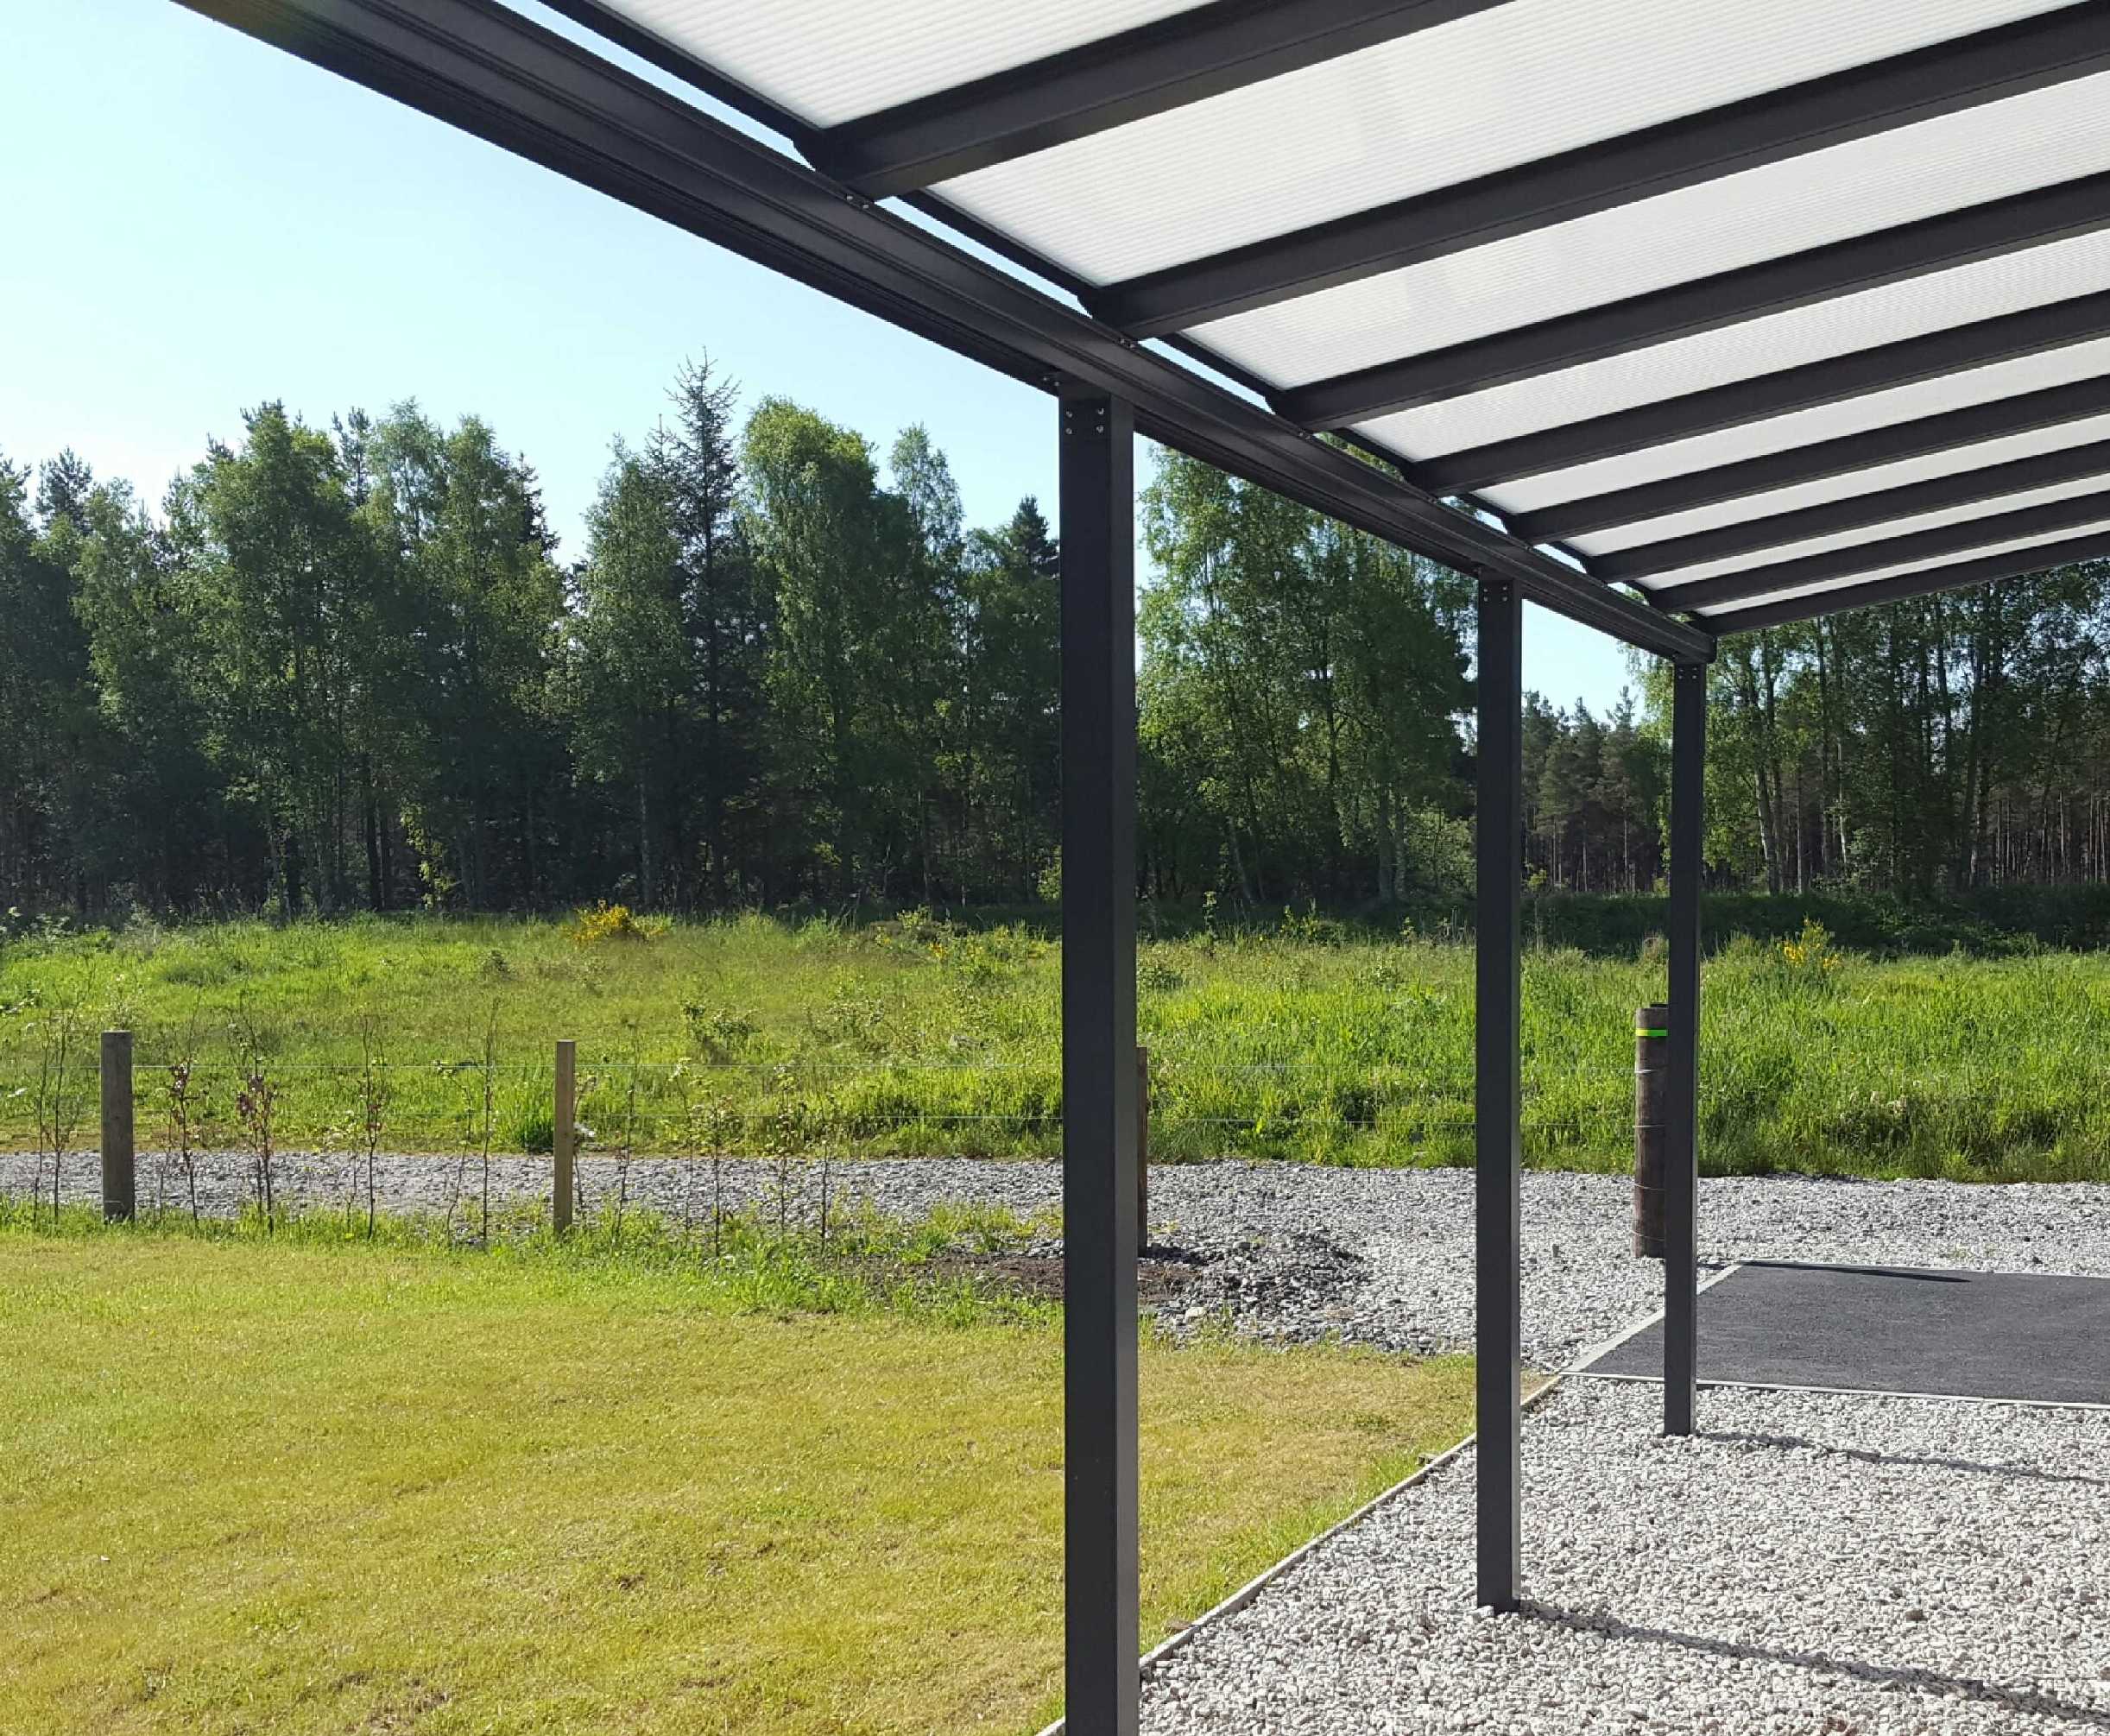 Omega Smart Lean-To Canopy, Anthracite Grey, 6mm Glass Clear Plate Polycarbonate Glazing - 4.2m (W) x 3.5m (P), (3) Supporting Posts